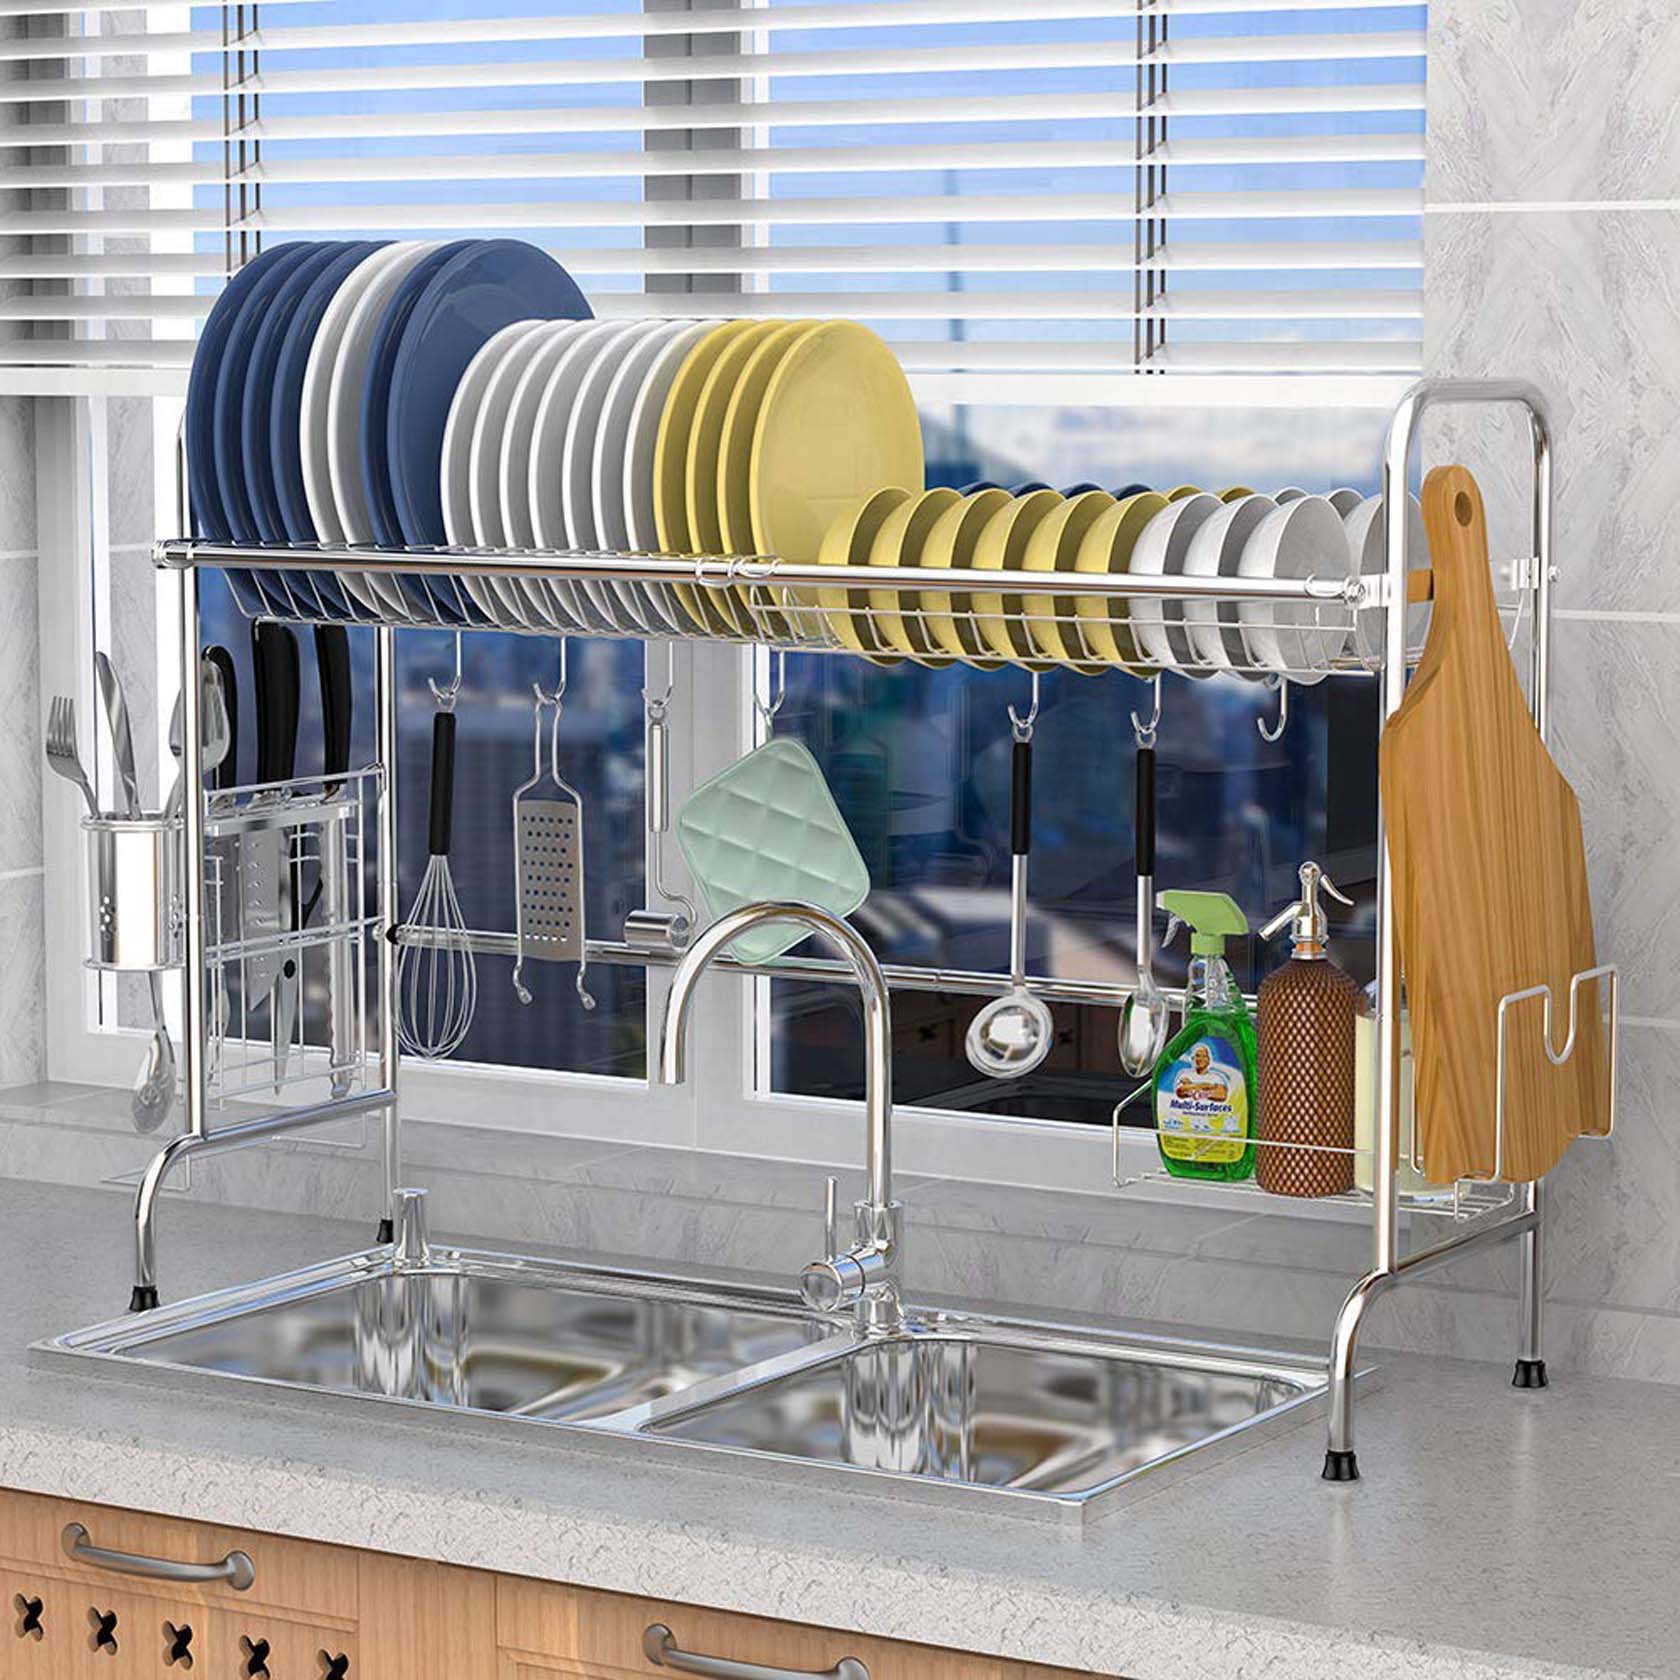 An Automated Rack For Kitchen Utensils